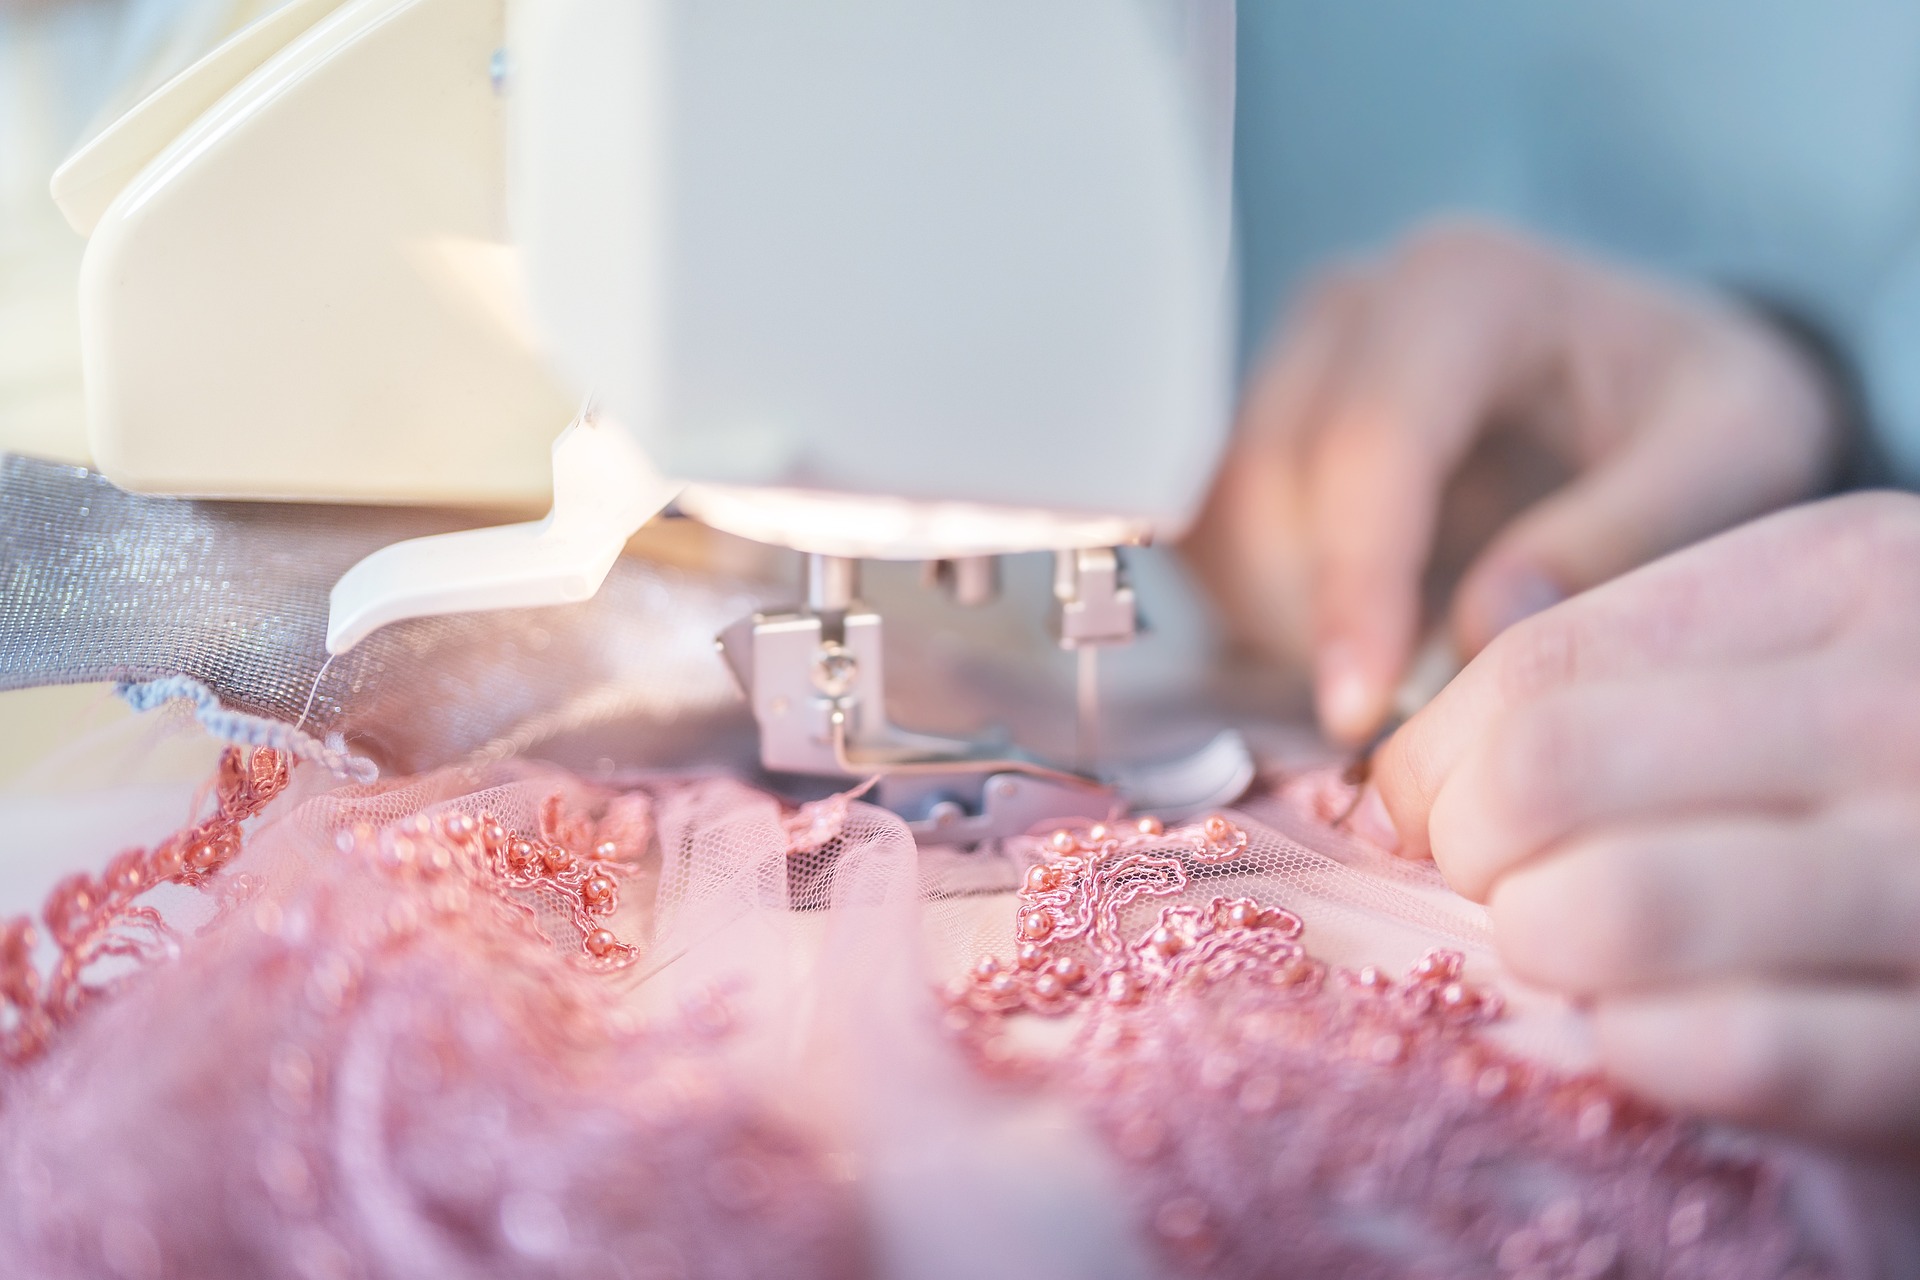 An image of someone using a sewing machine